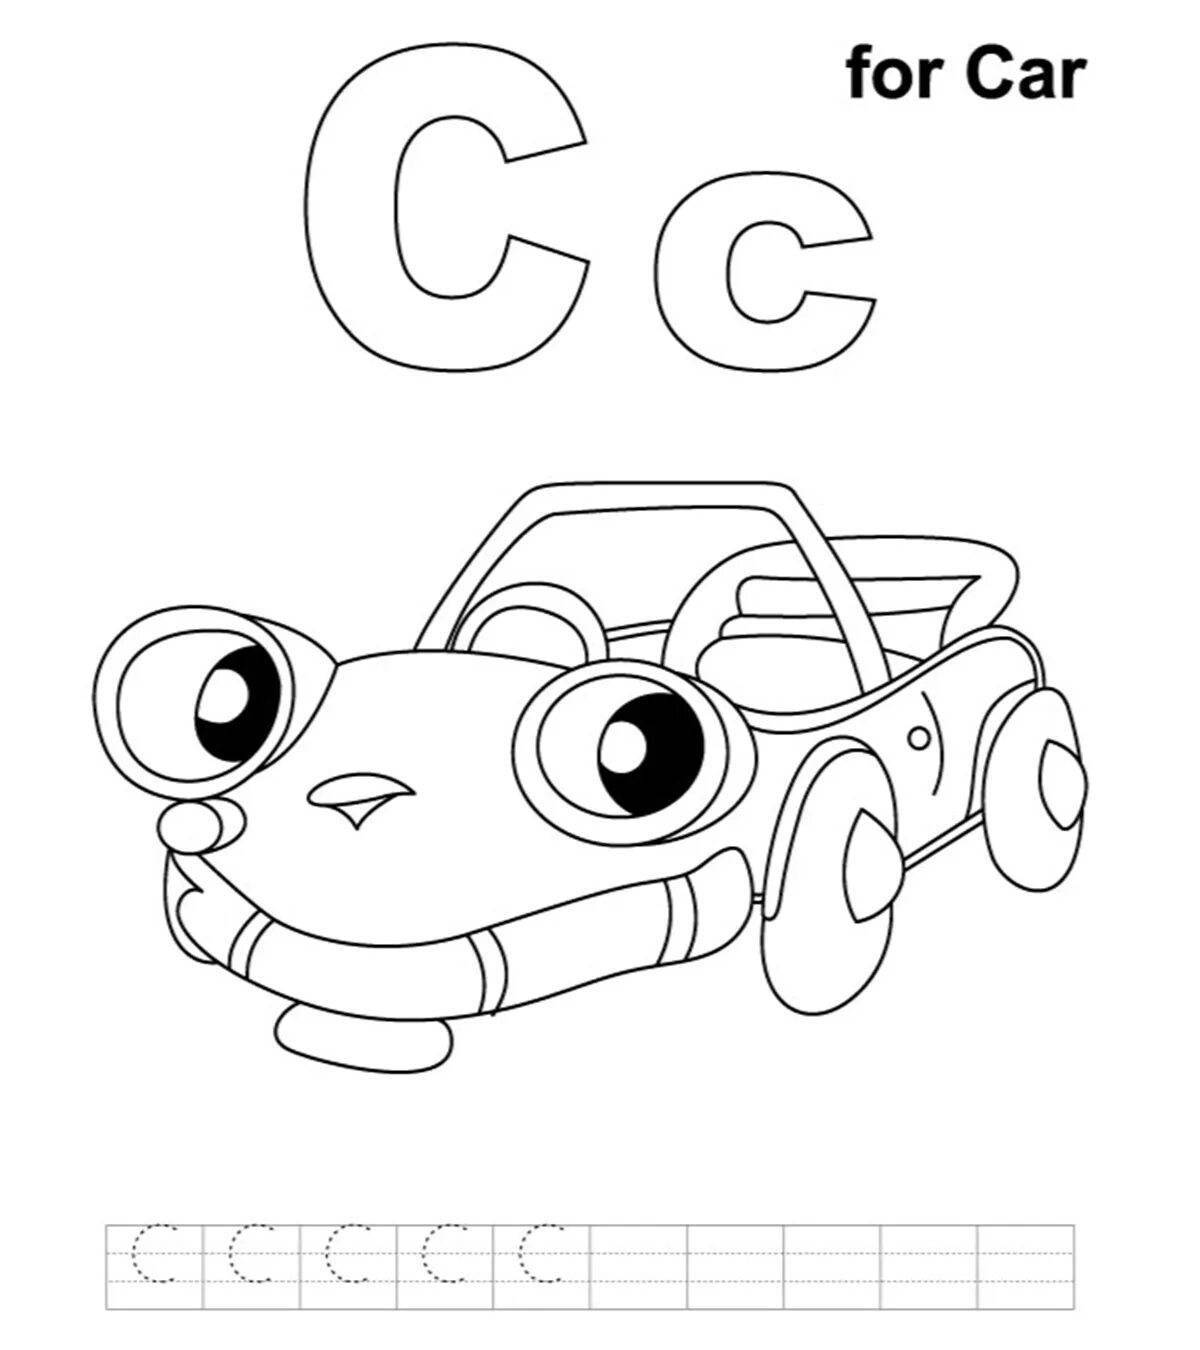 Coloring cute car with eyes